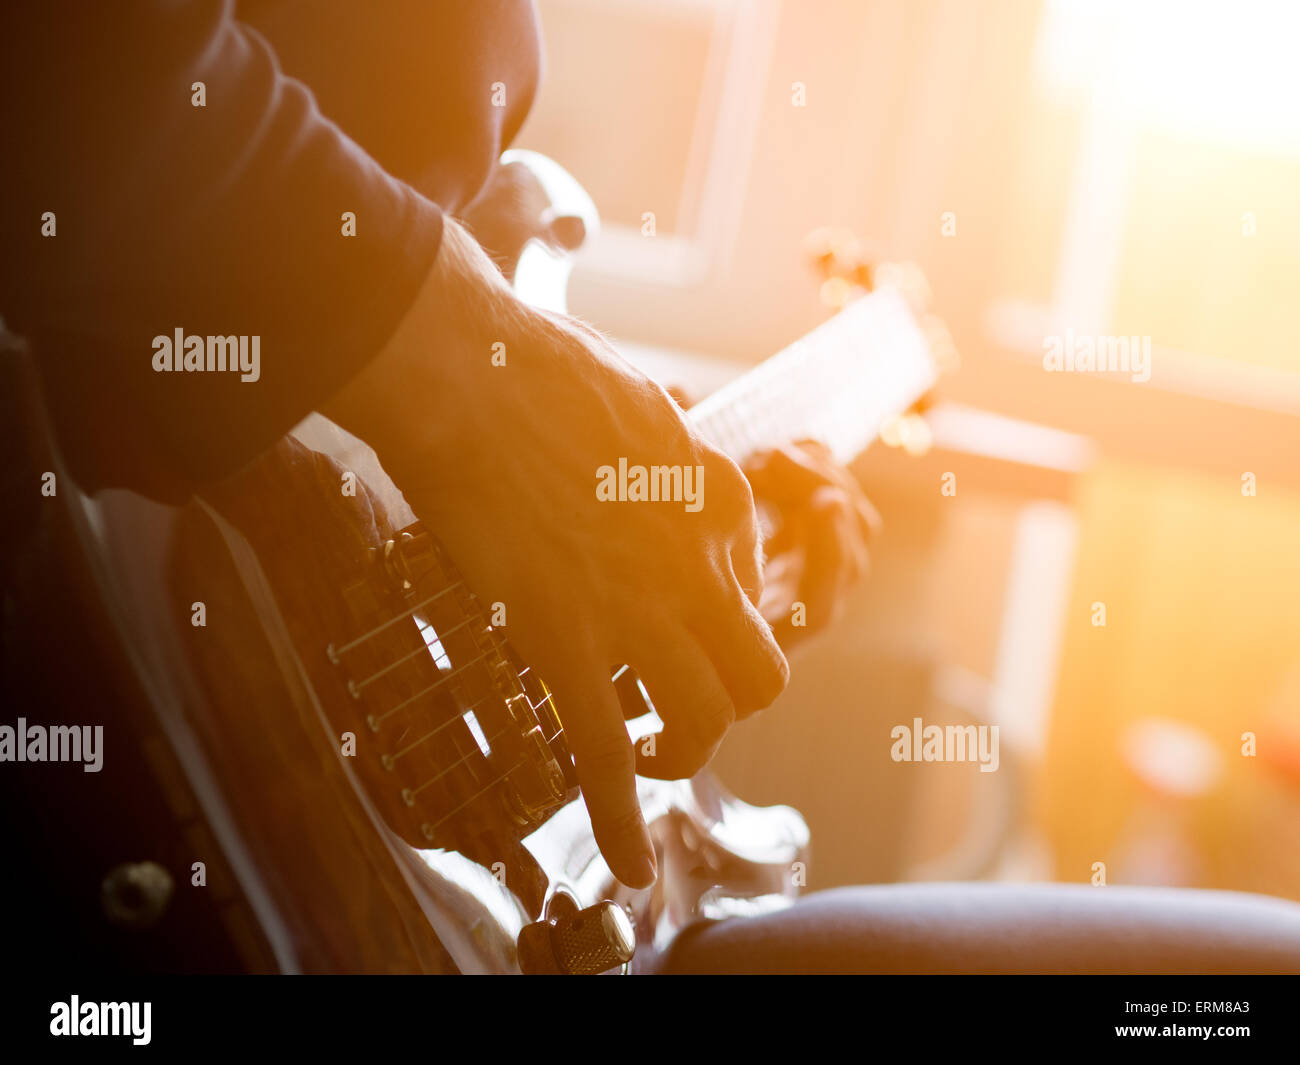 Male hand playing on acoustic guitar. Close-up. Stock Photo